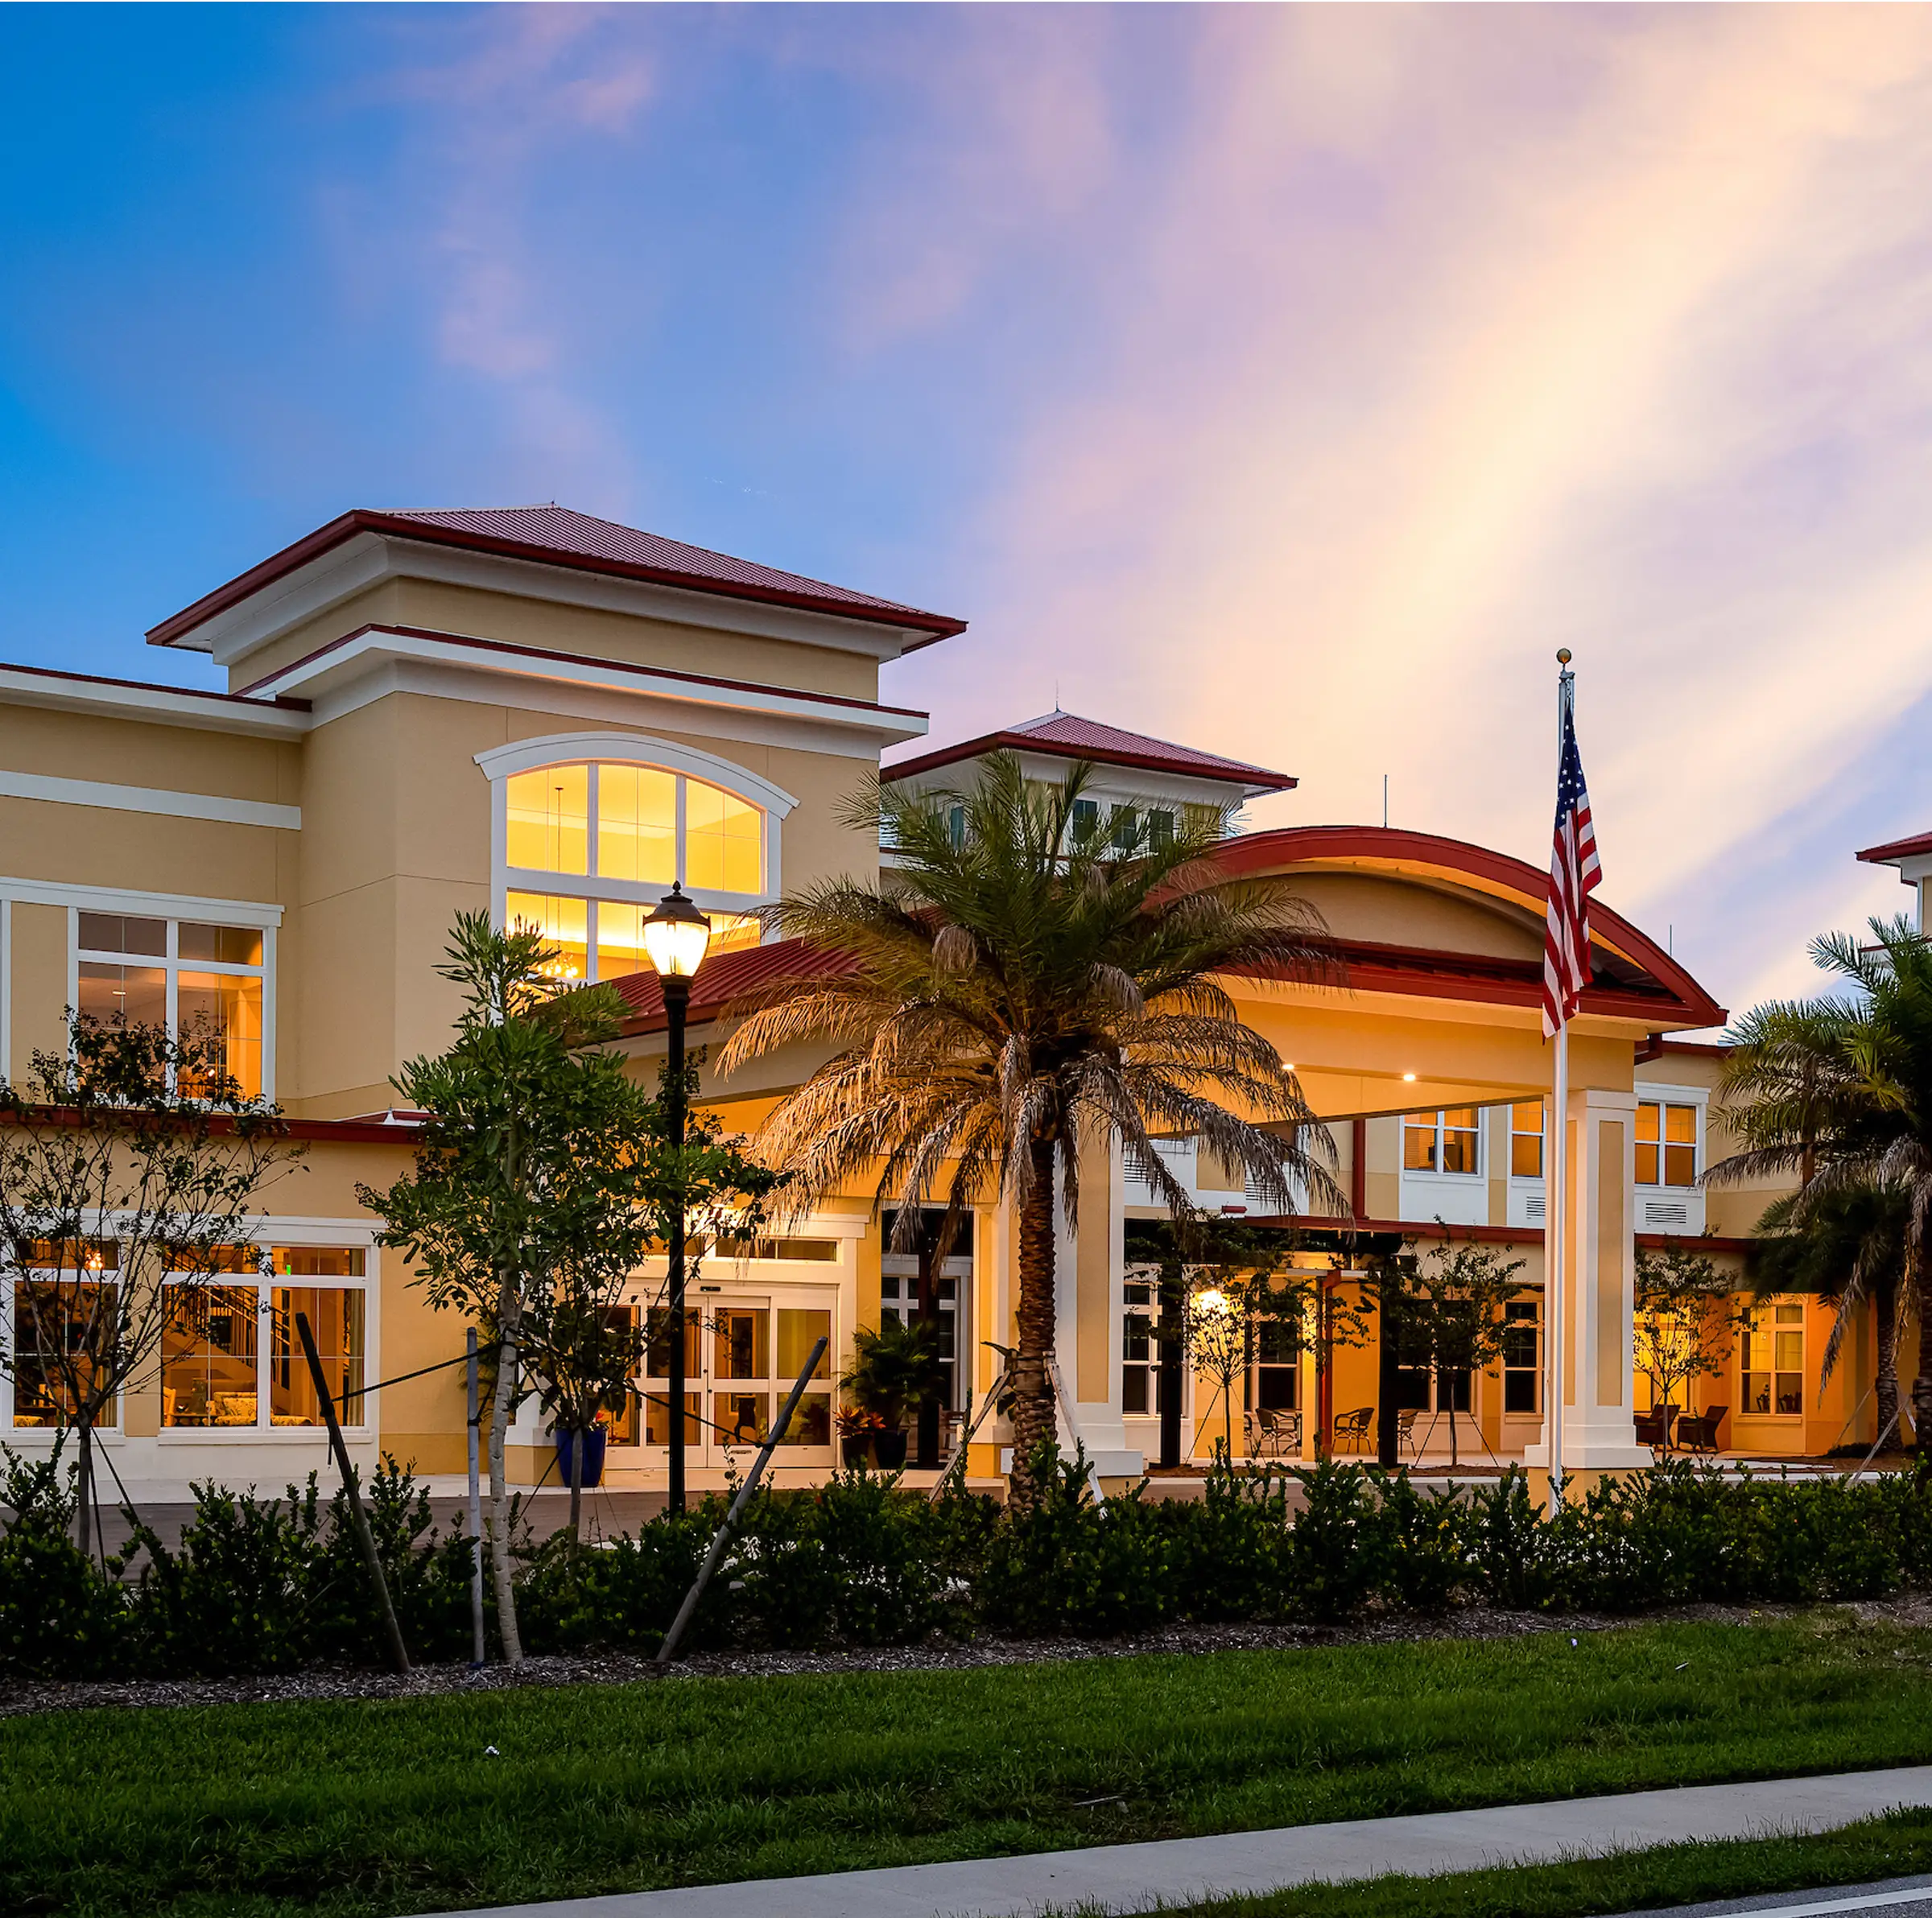 street view of yellow stucco senior living community with american flag and palm trees